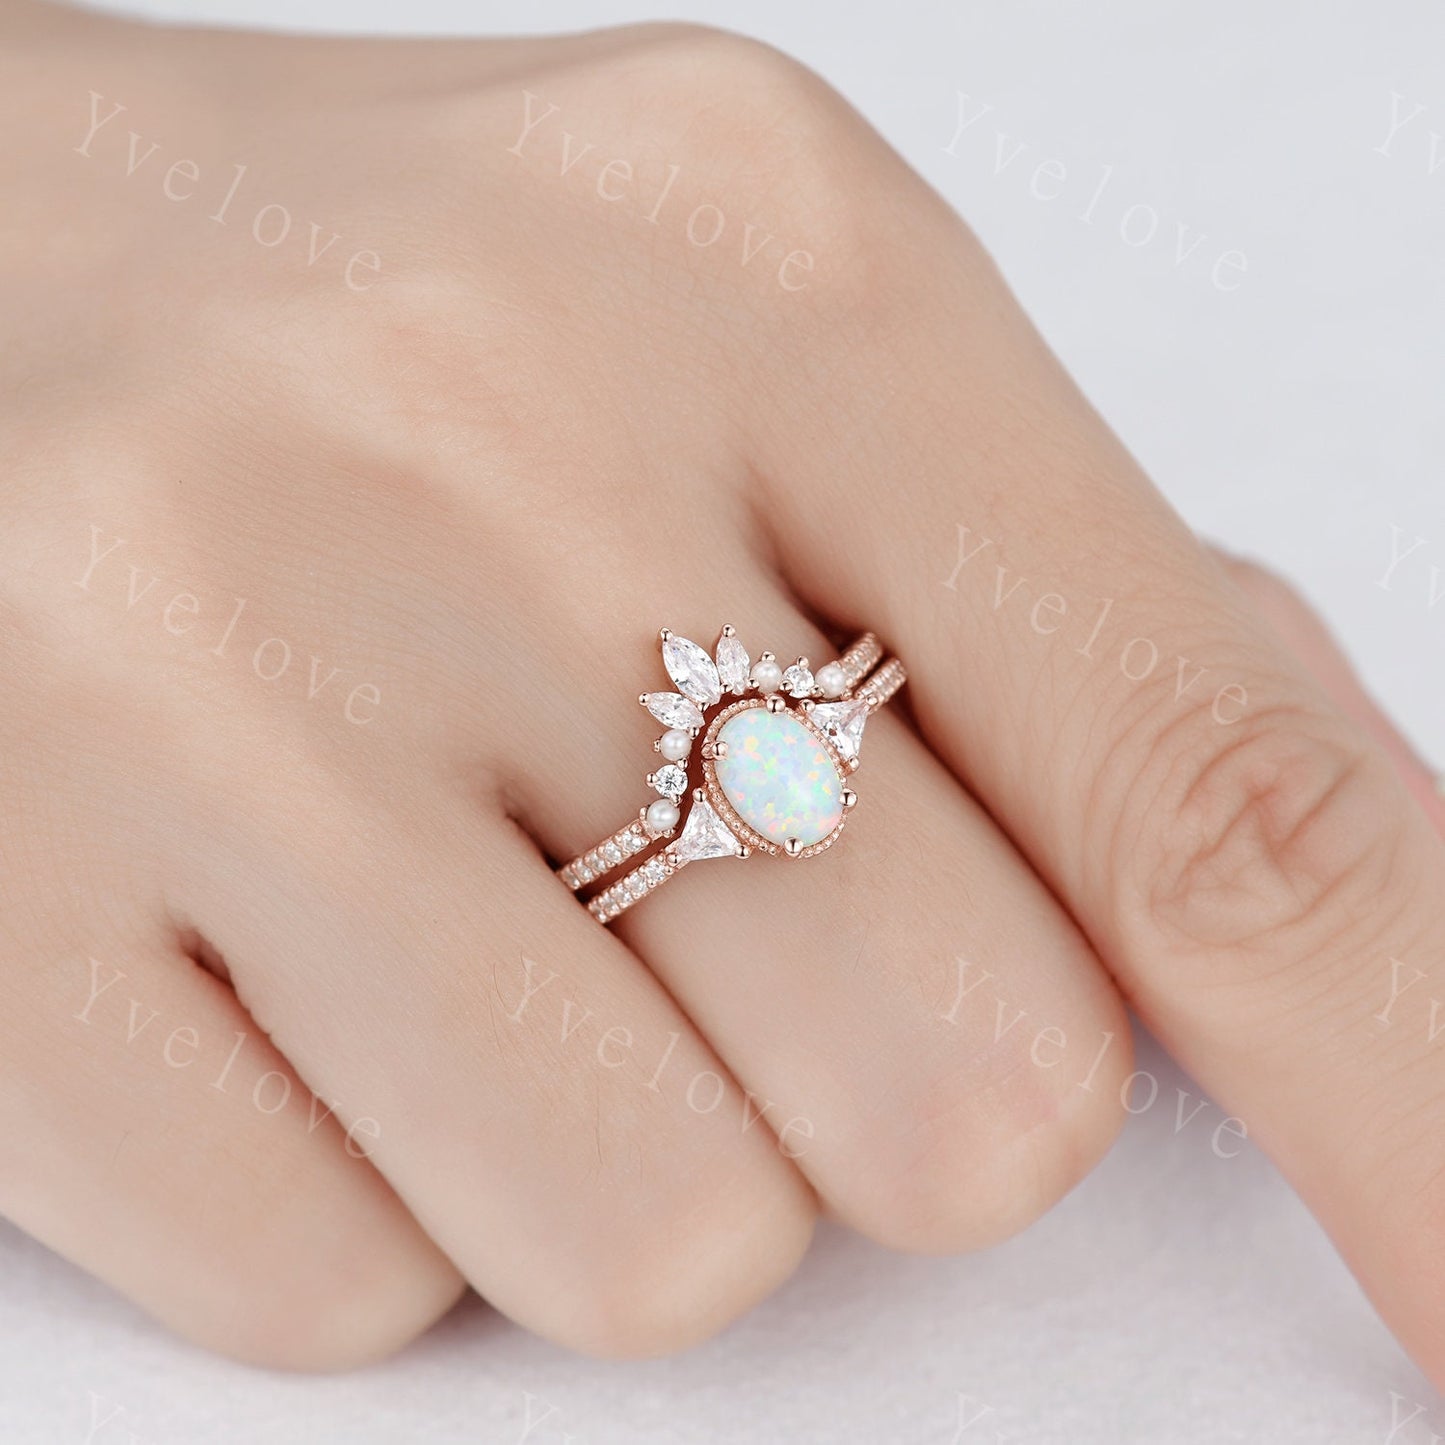 White Opal Engagement Ring Set,Three Stone Ring,Side Triangle Ring,Rose Gold Rings for Women, Unique Curved Pearl Wedding Band, Handmade